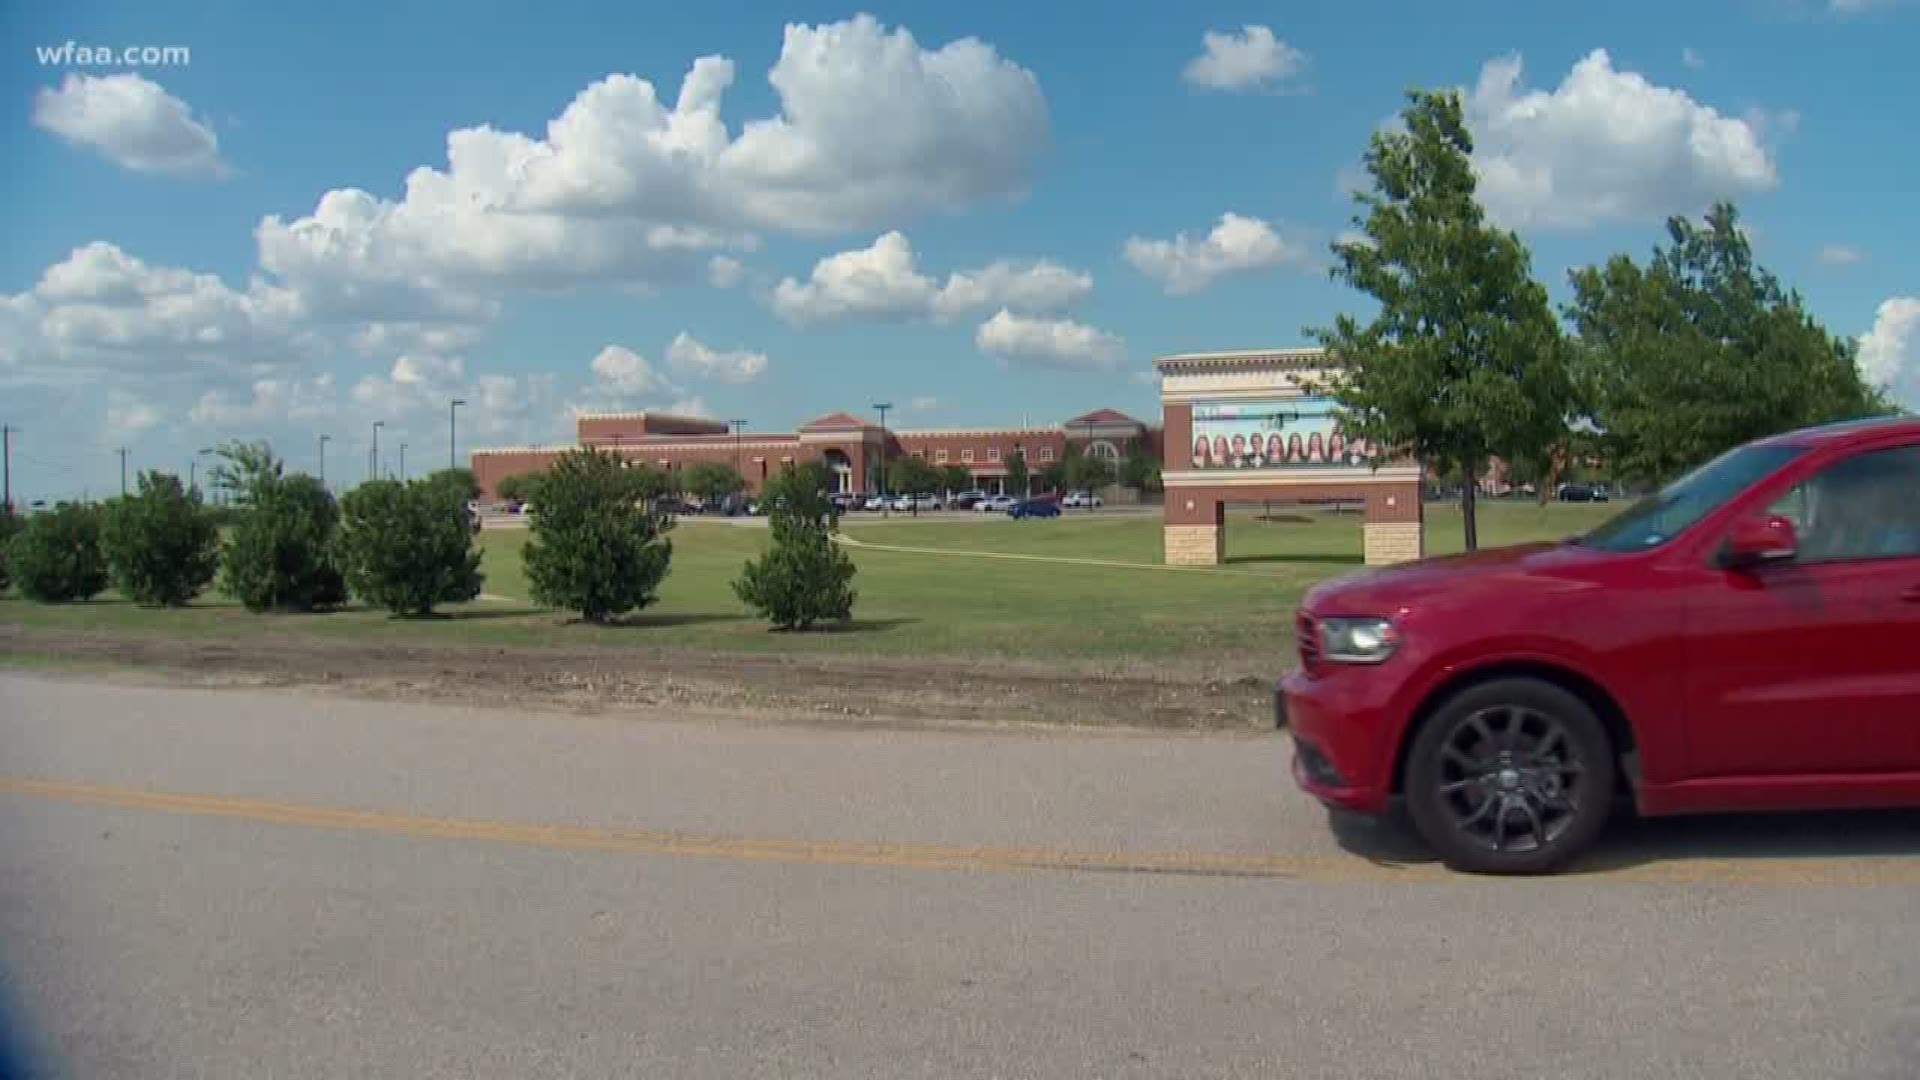 Prosper students learn real lesson about censorship